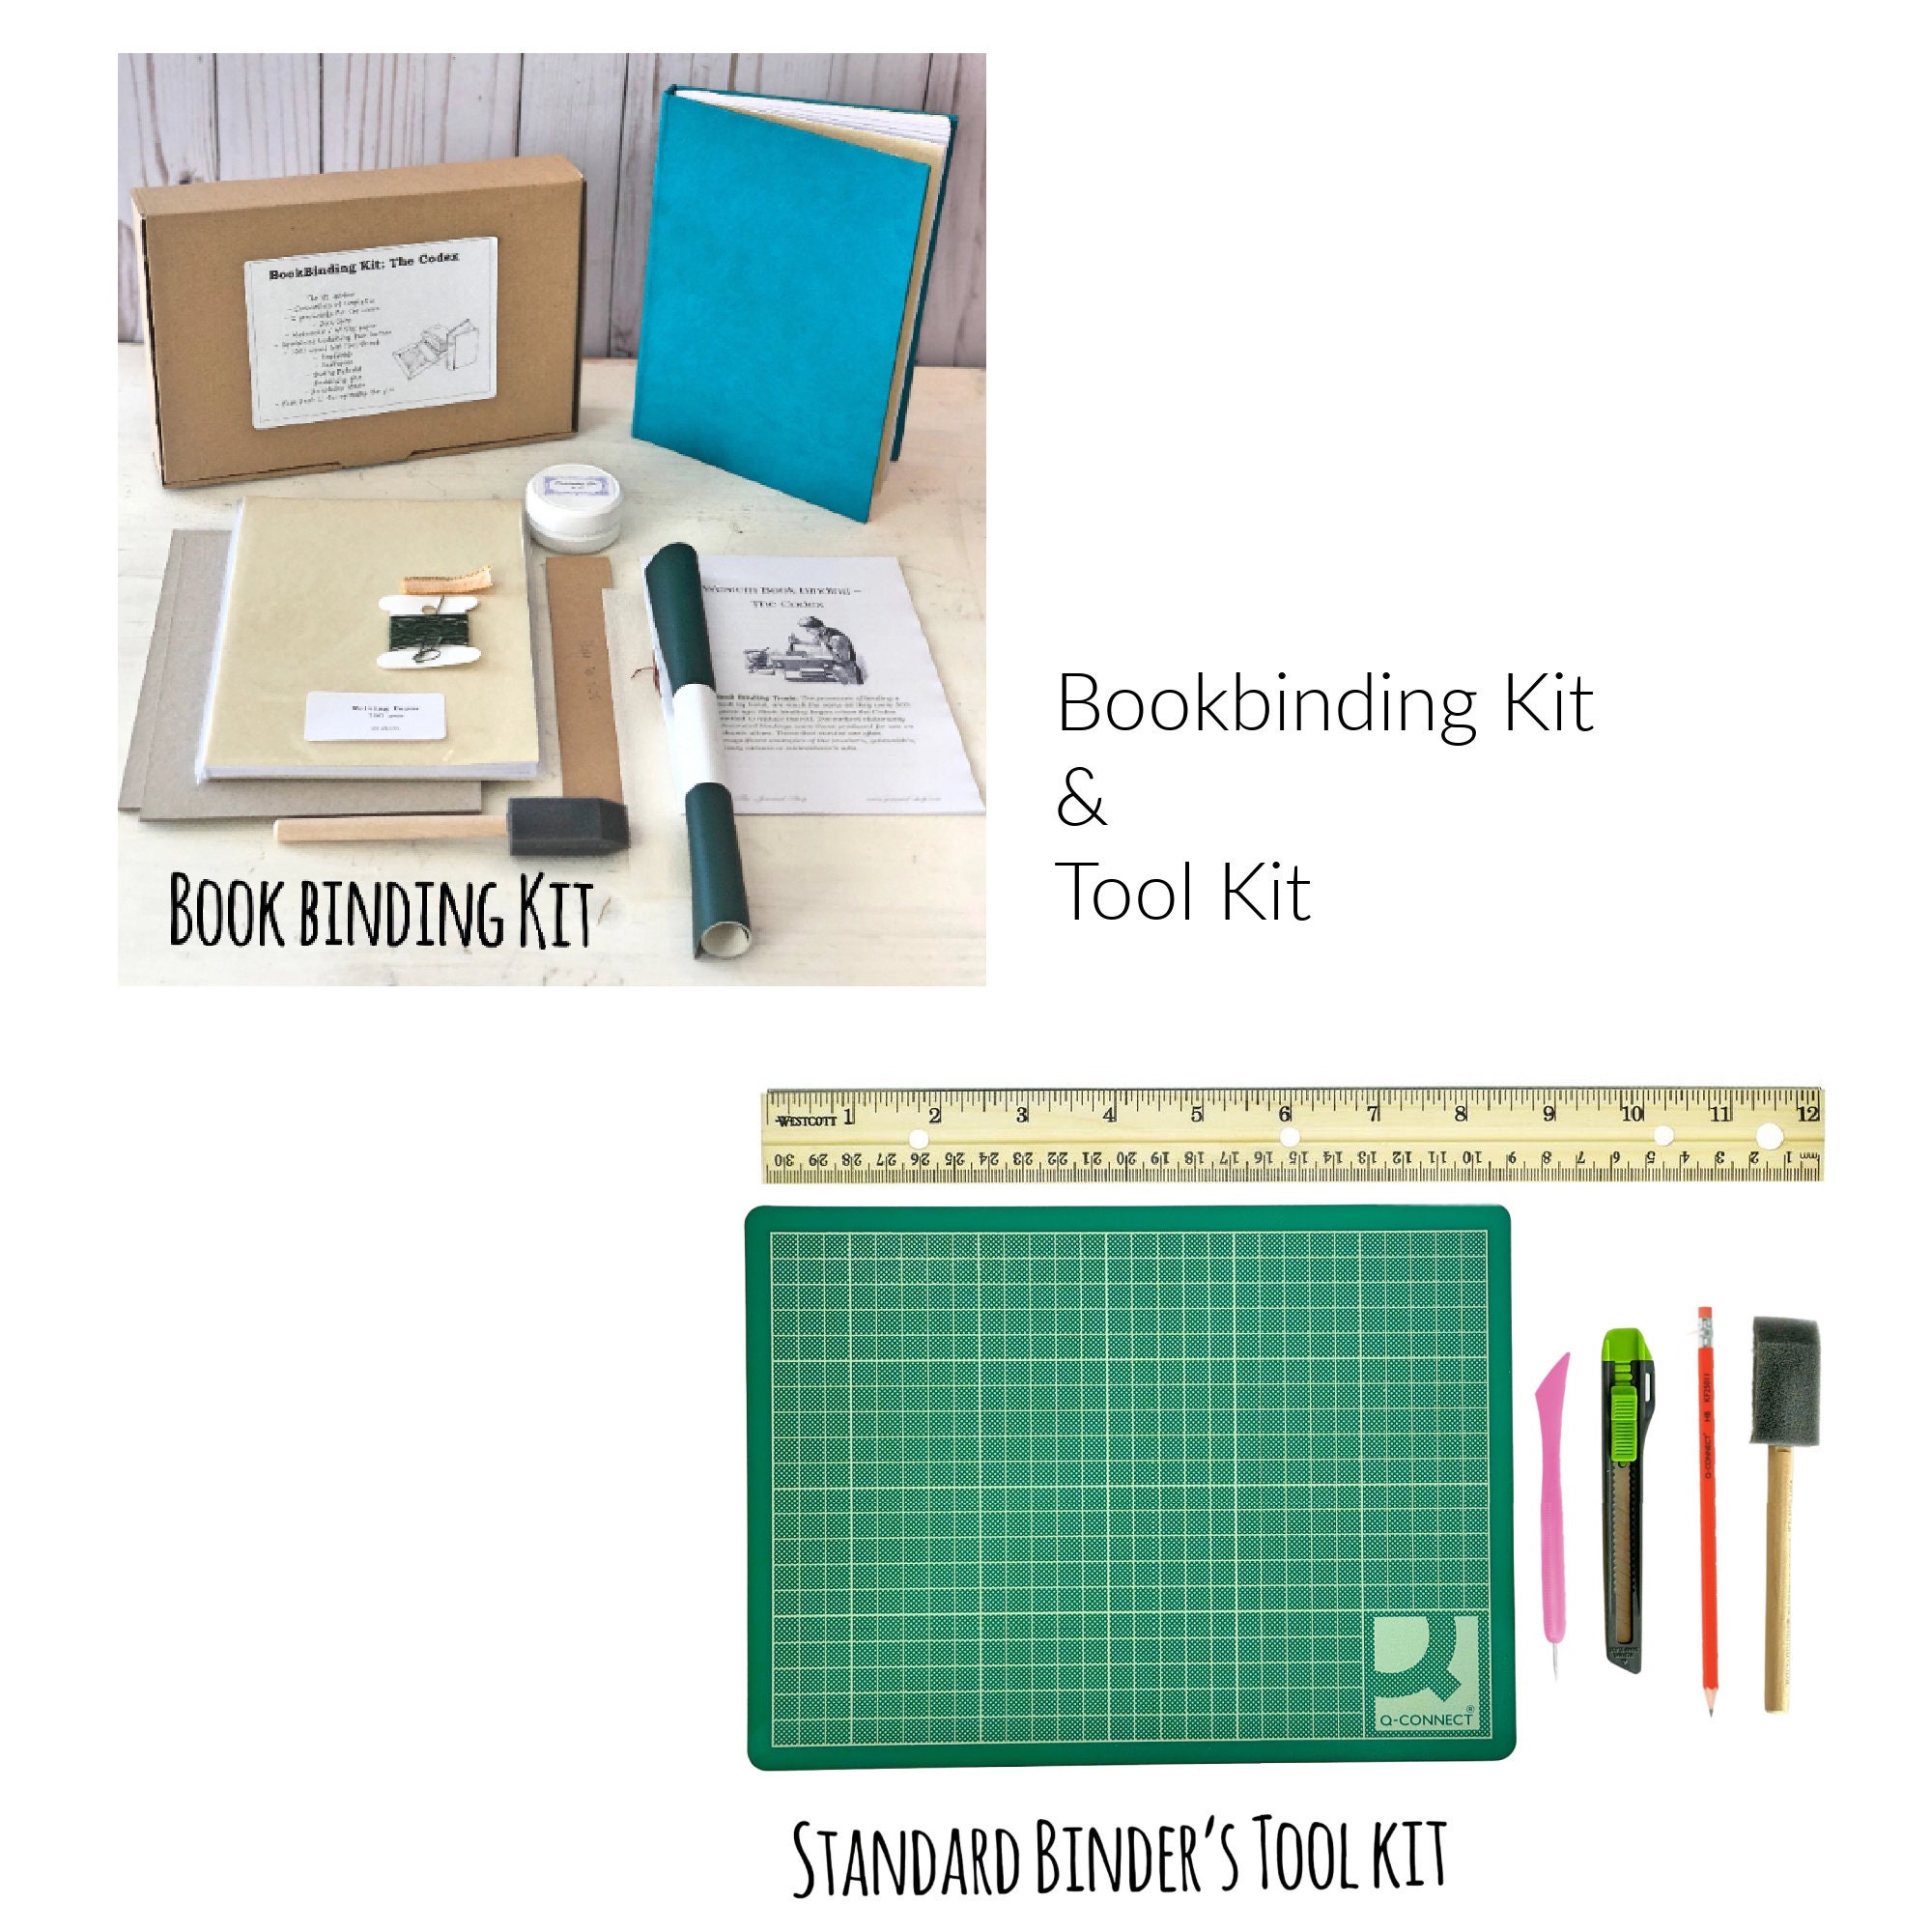 Free Images : bookbinding, tools, workshop, craft, book, paper